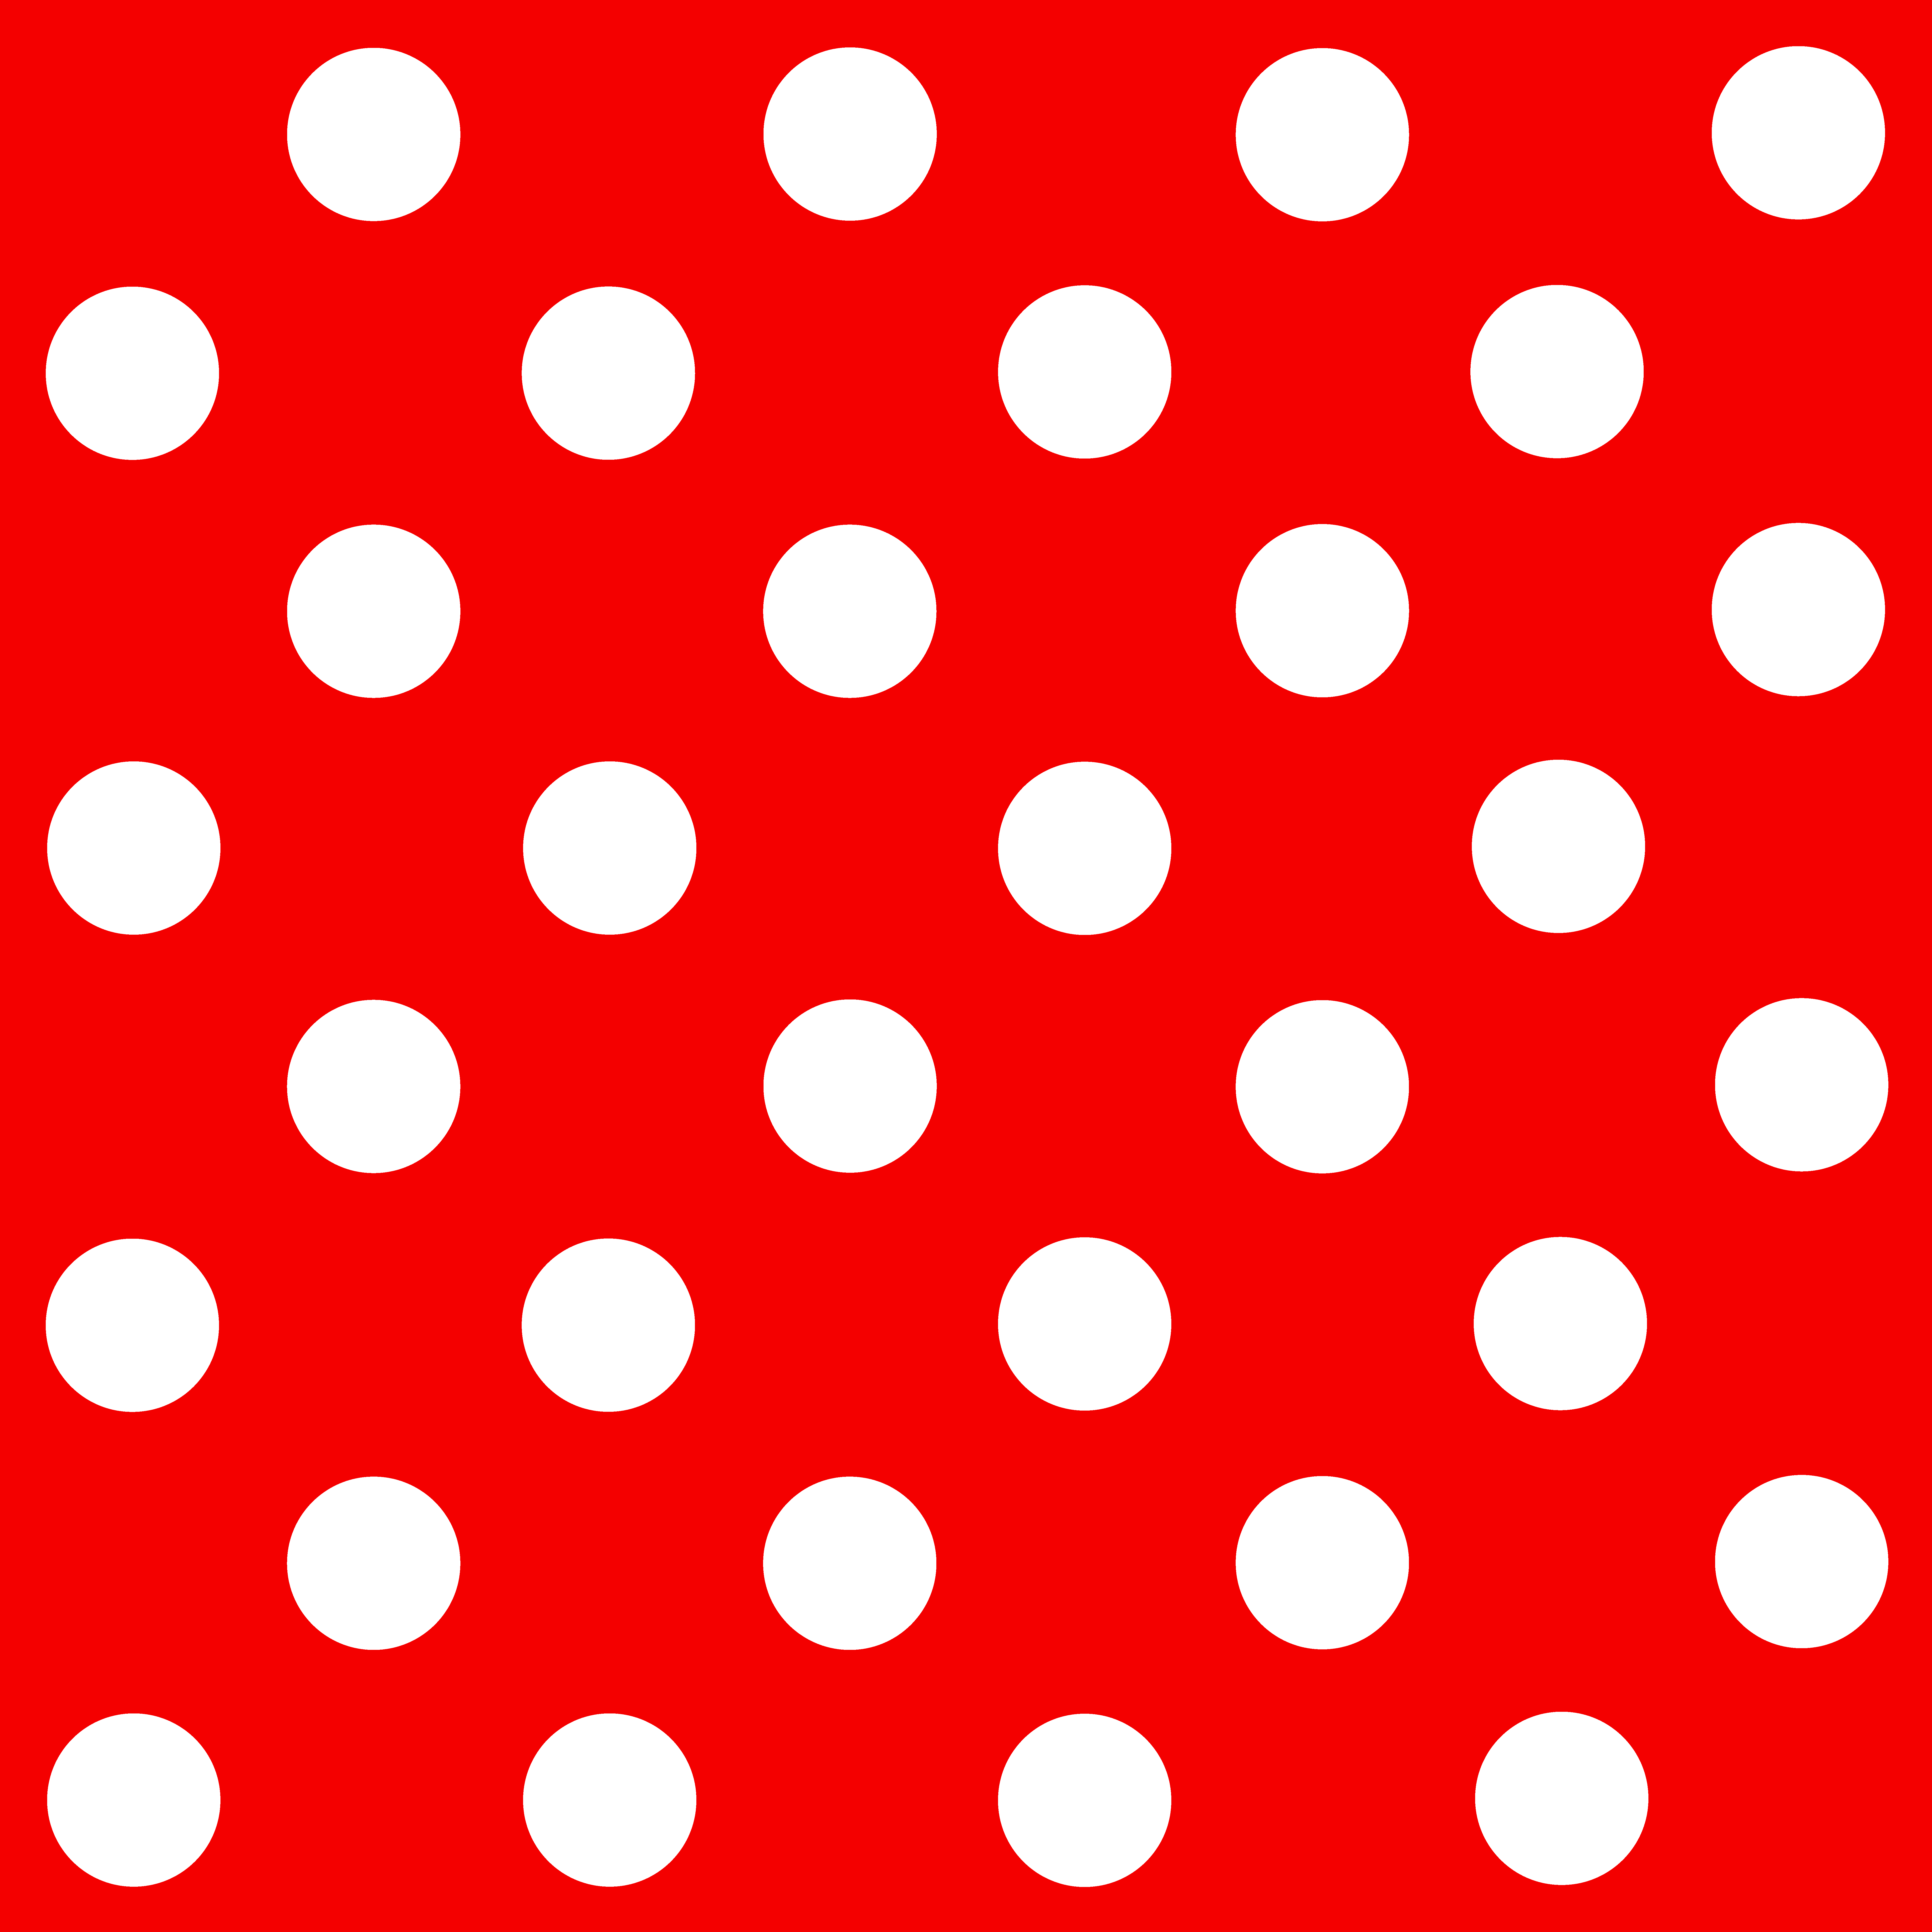 Red and White Polka Dots Pattern - Free Clip Art